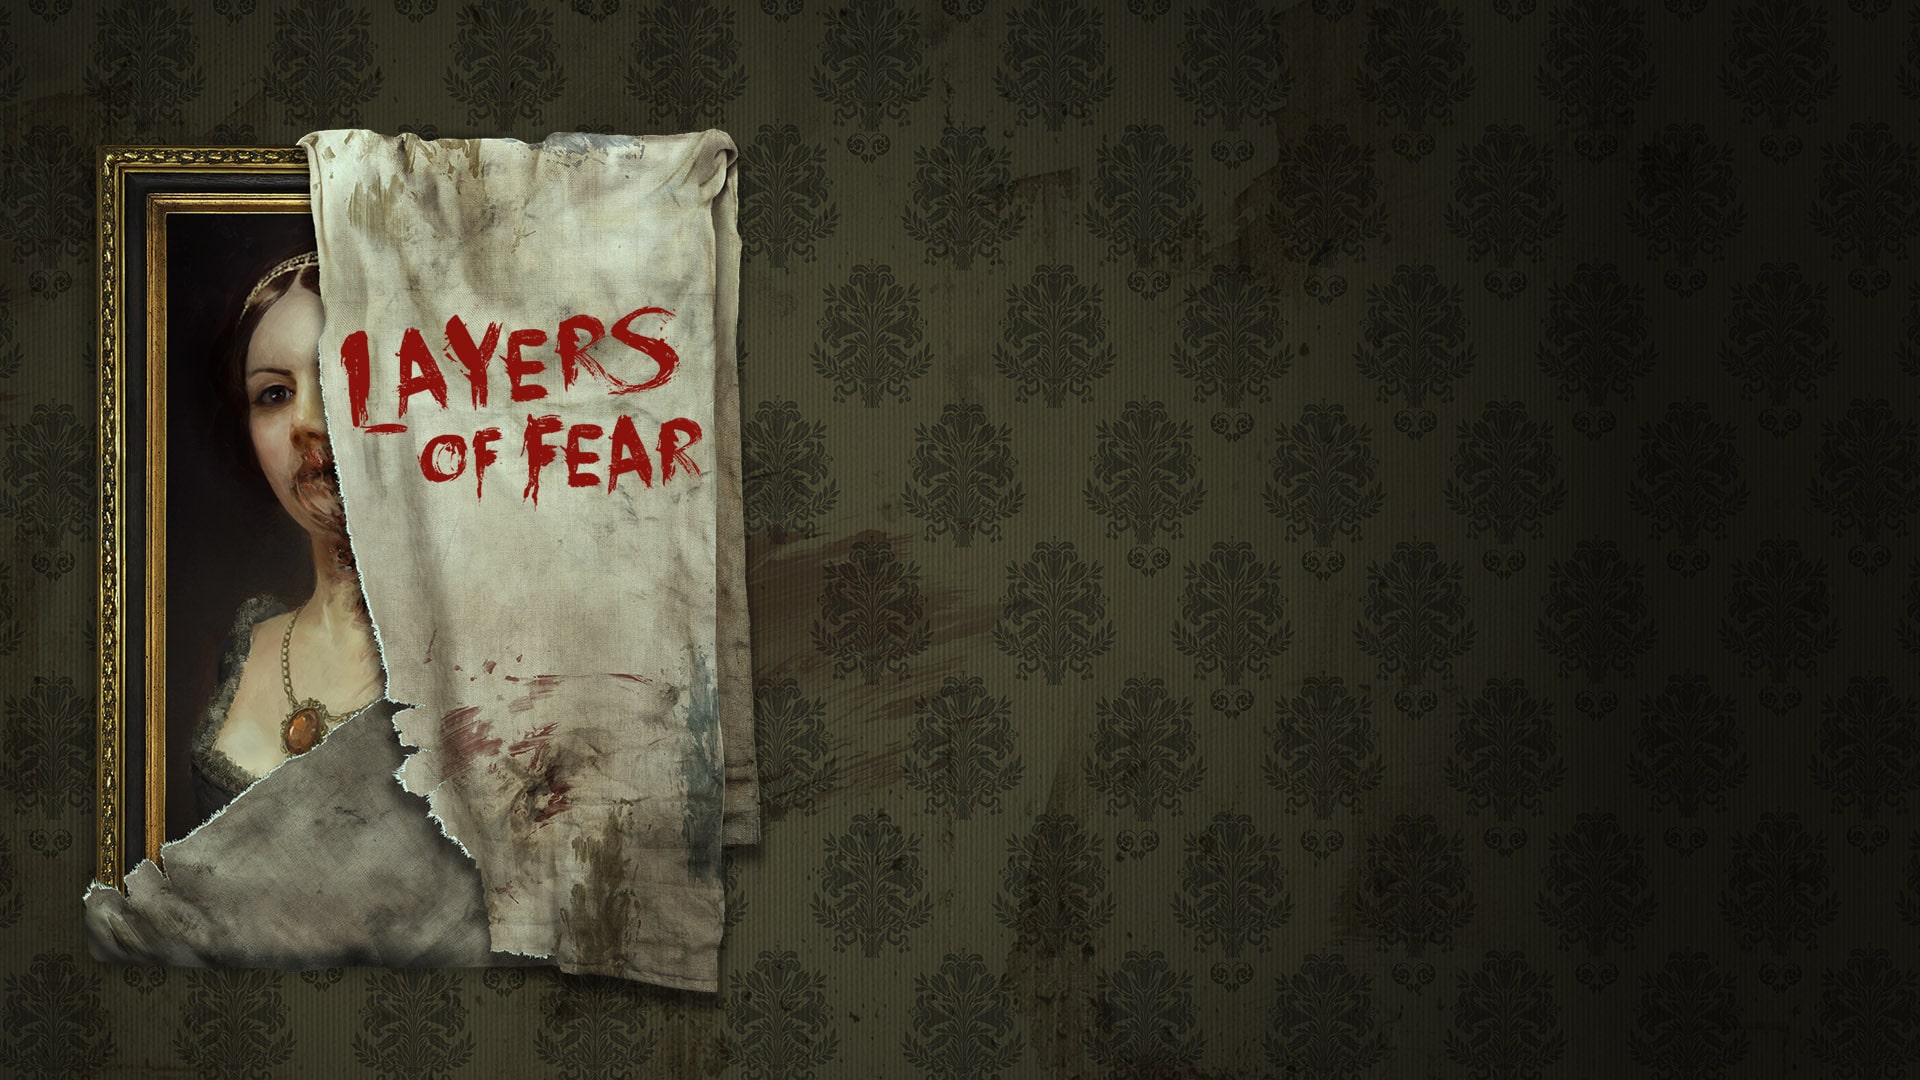 Layers of Fear (日英韓文版)